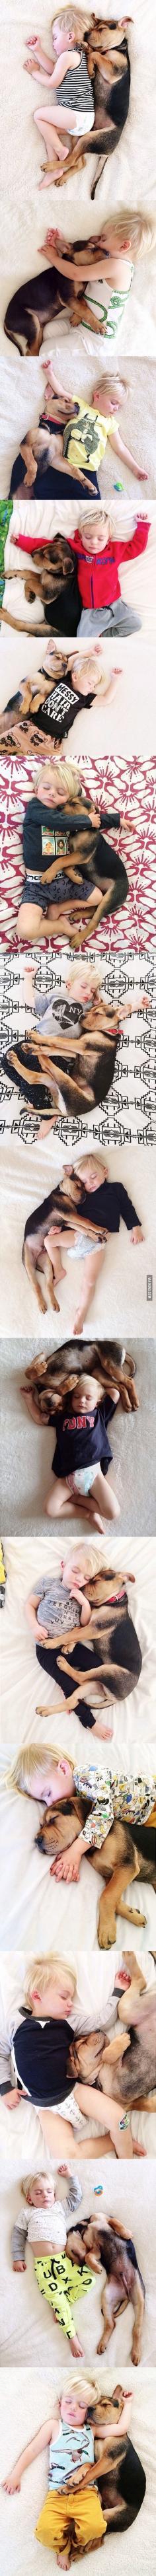 A toddler and his puppy continue napping together.... this is one of the cutest things ever